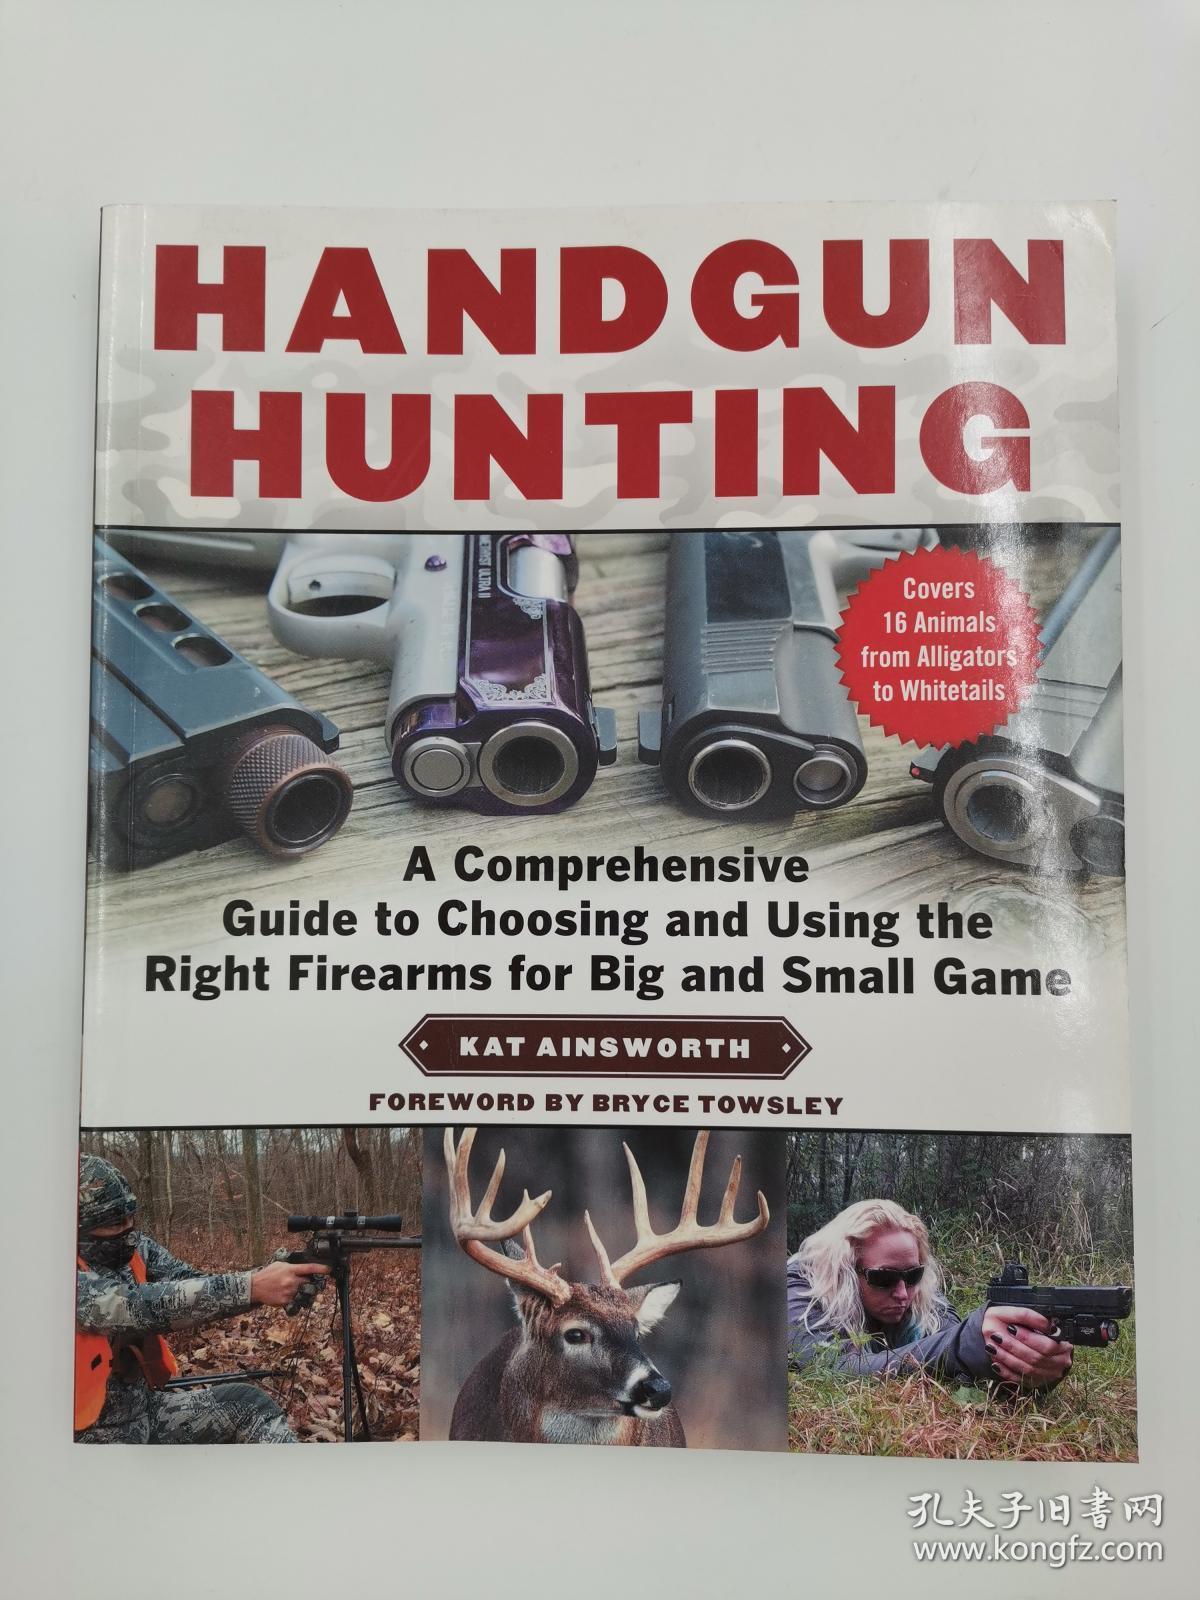 Handgun Hunting: A Comprehensive Guide to Choosing and Using the Right Firearms for Big and Small Game